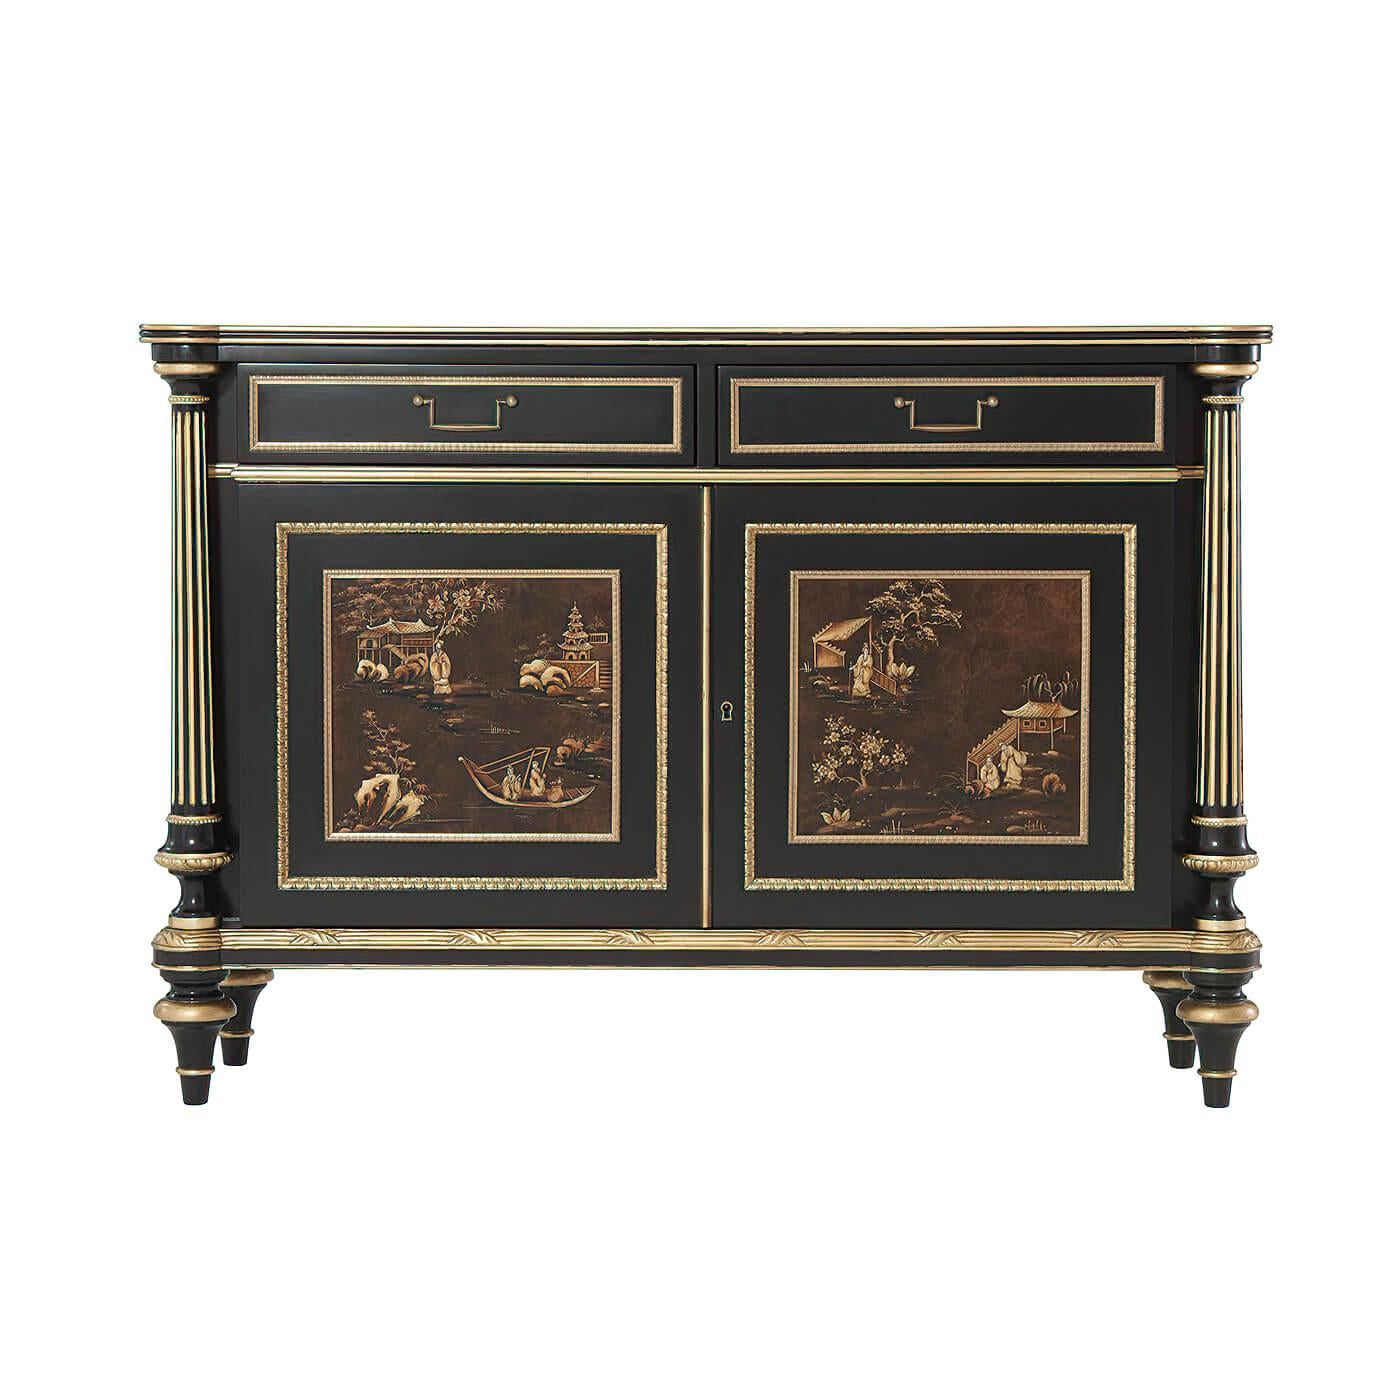 An ebonized mahogany and parcel gilt chinoiserie side cabinet, the rectangular molded edge top with protruding rounded corners, above two brass molding paneled drawers with brass handles, above two brass molding paneled and carved doors with hand